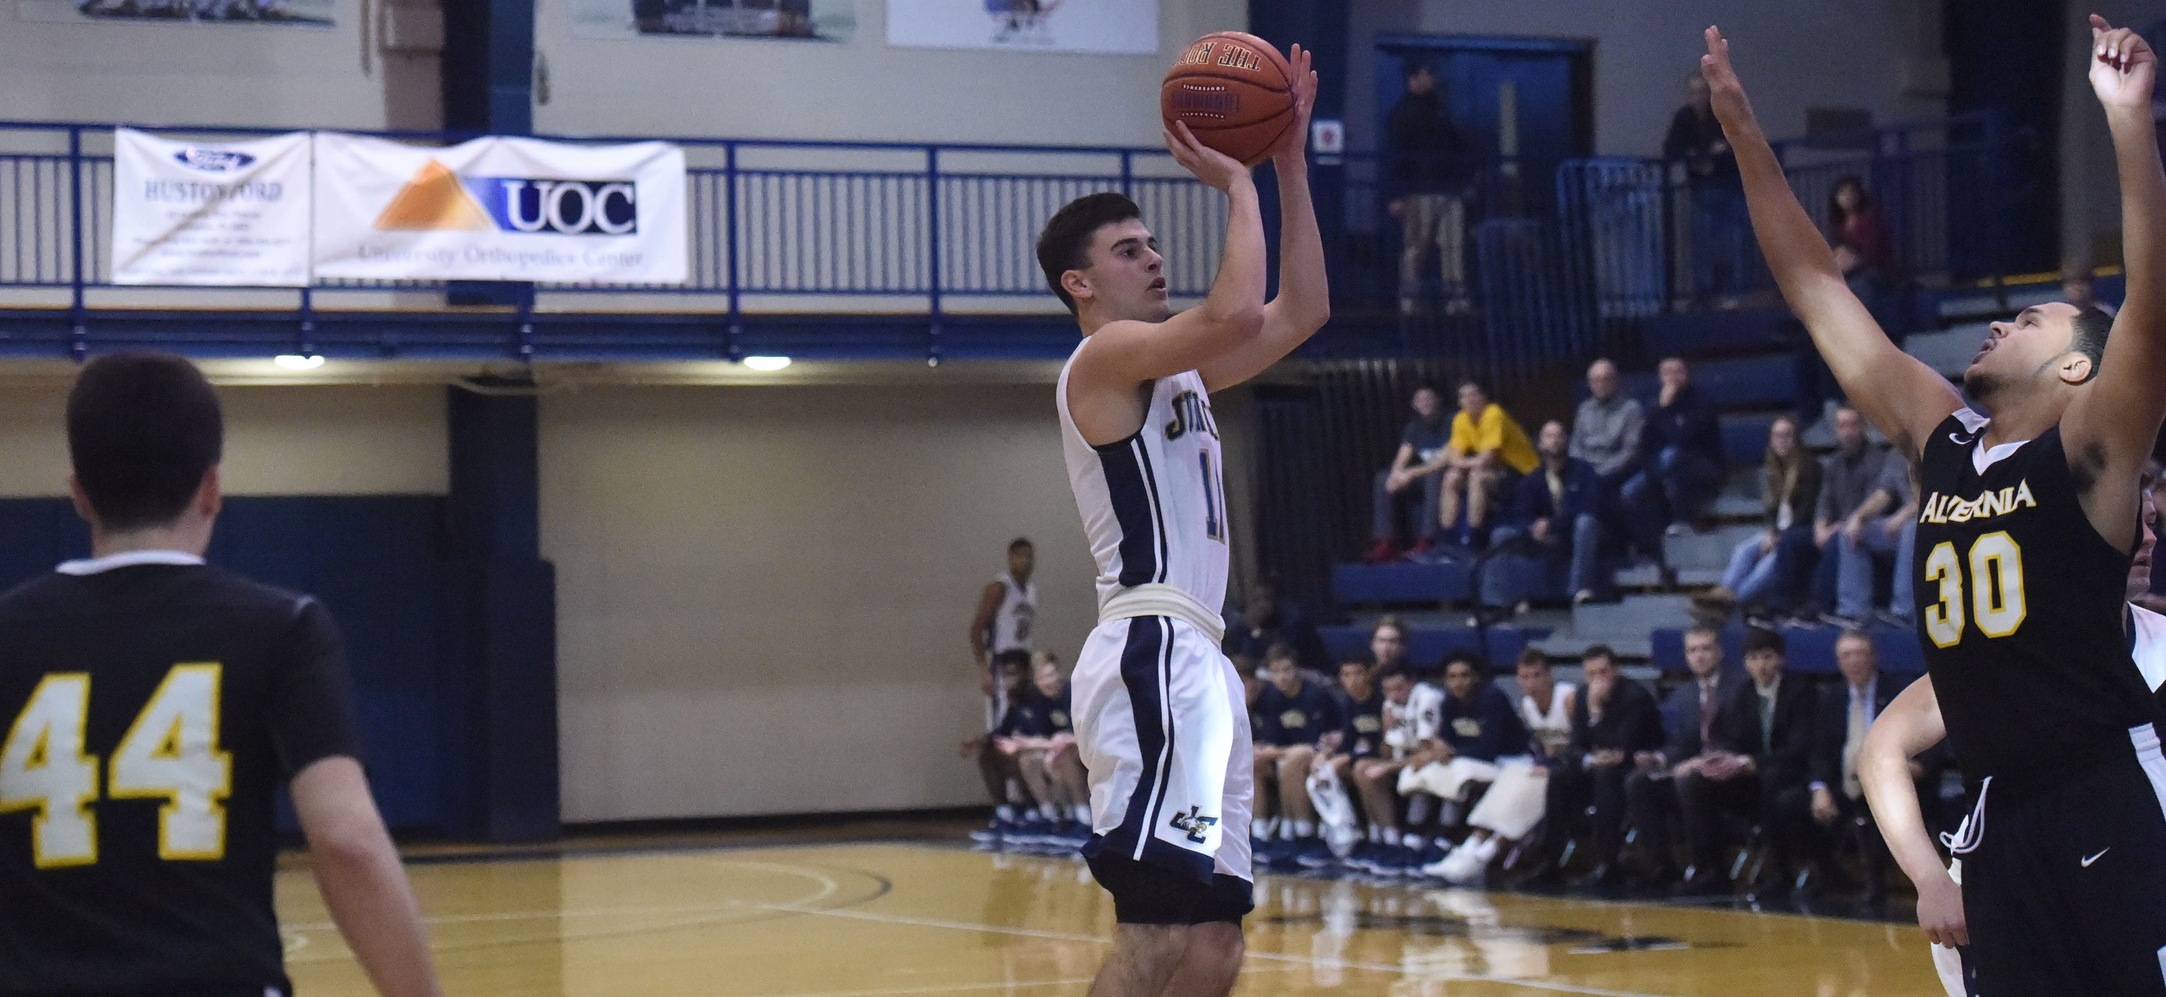 Paul Martello had a team-high 10 points against Wittenberg